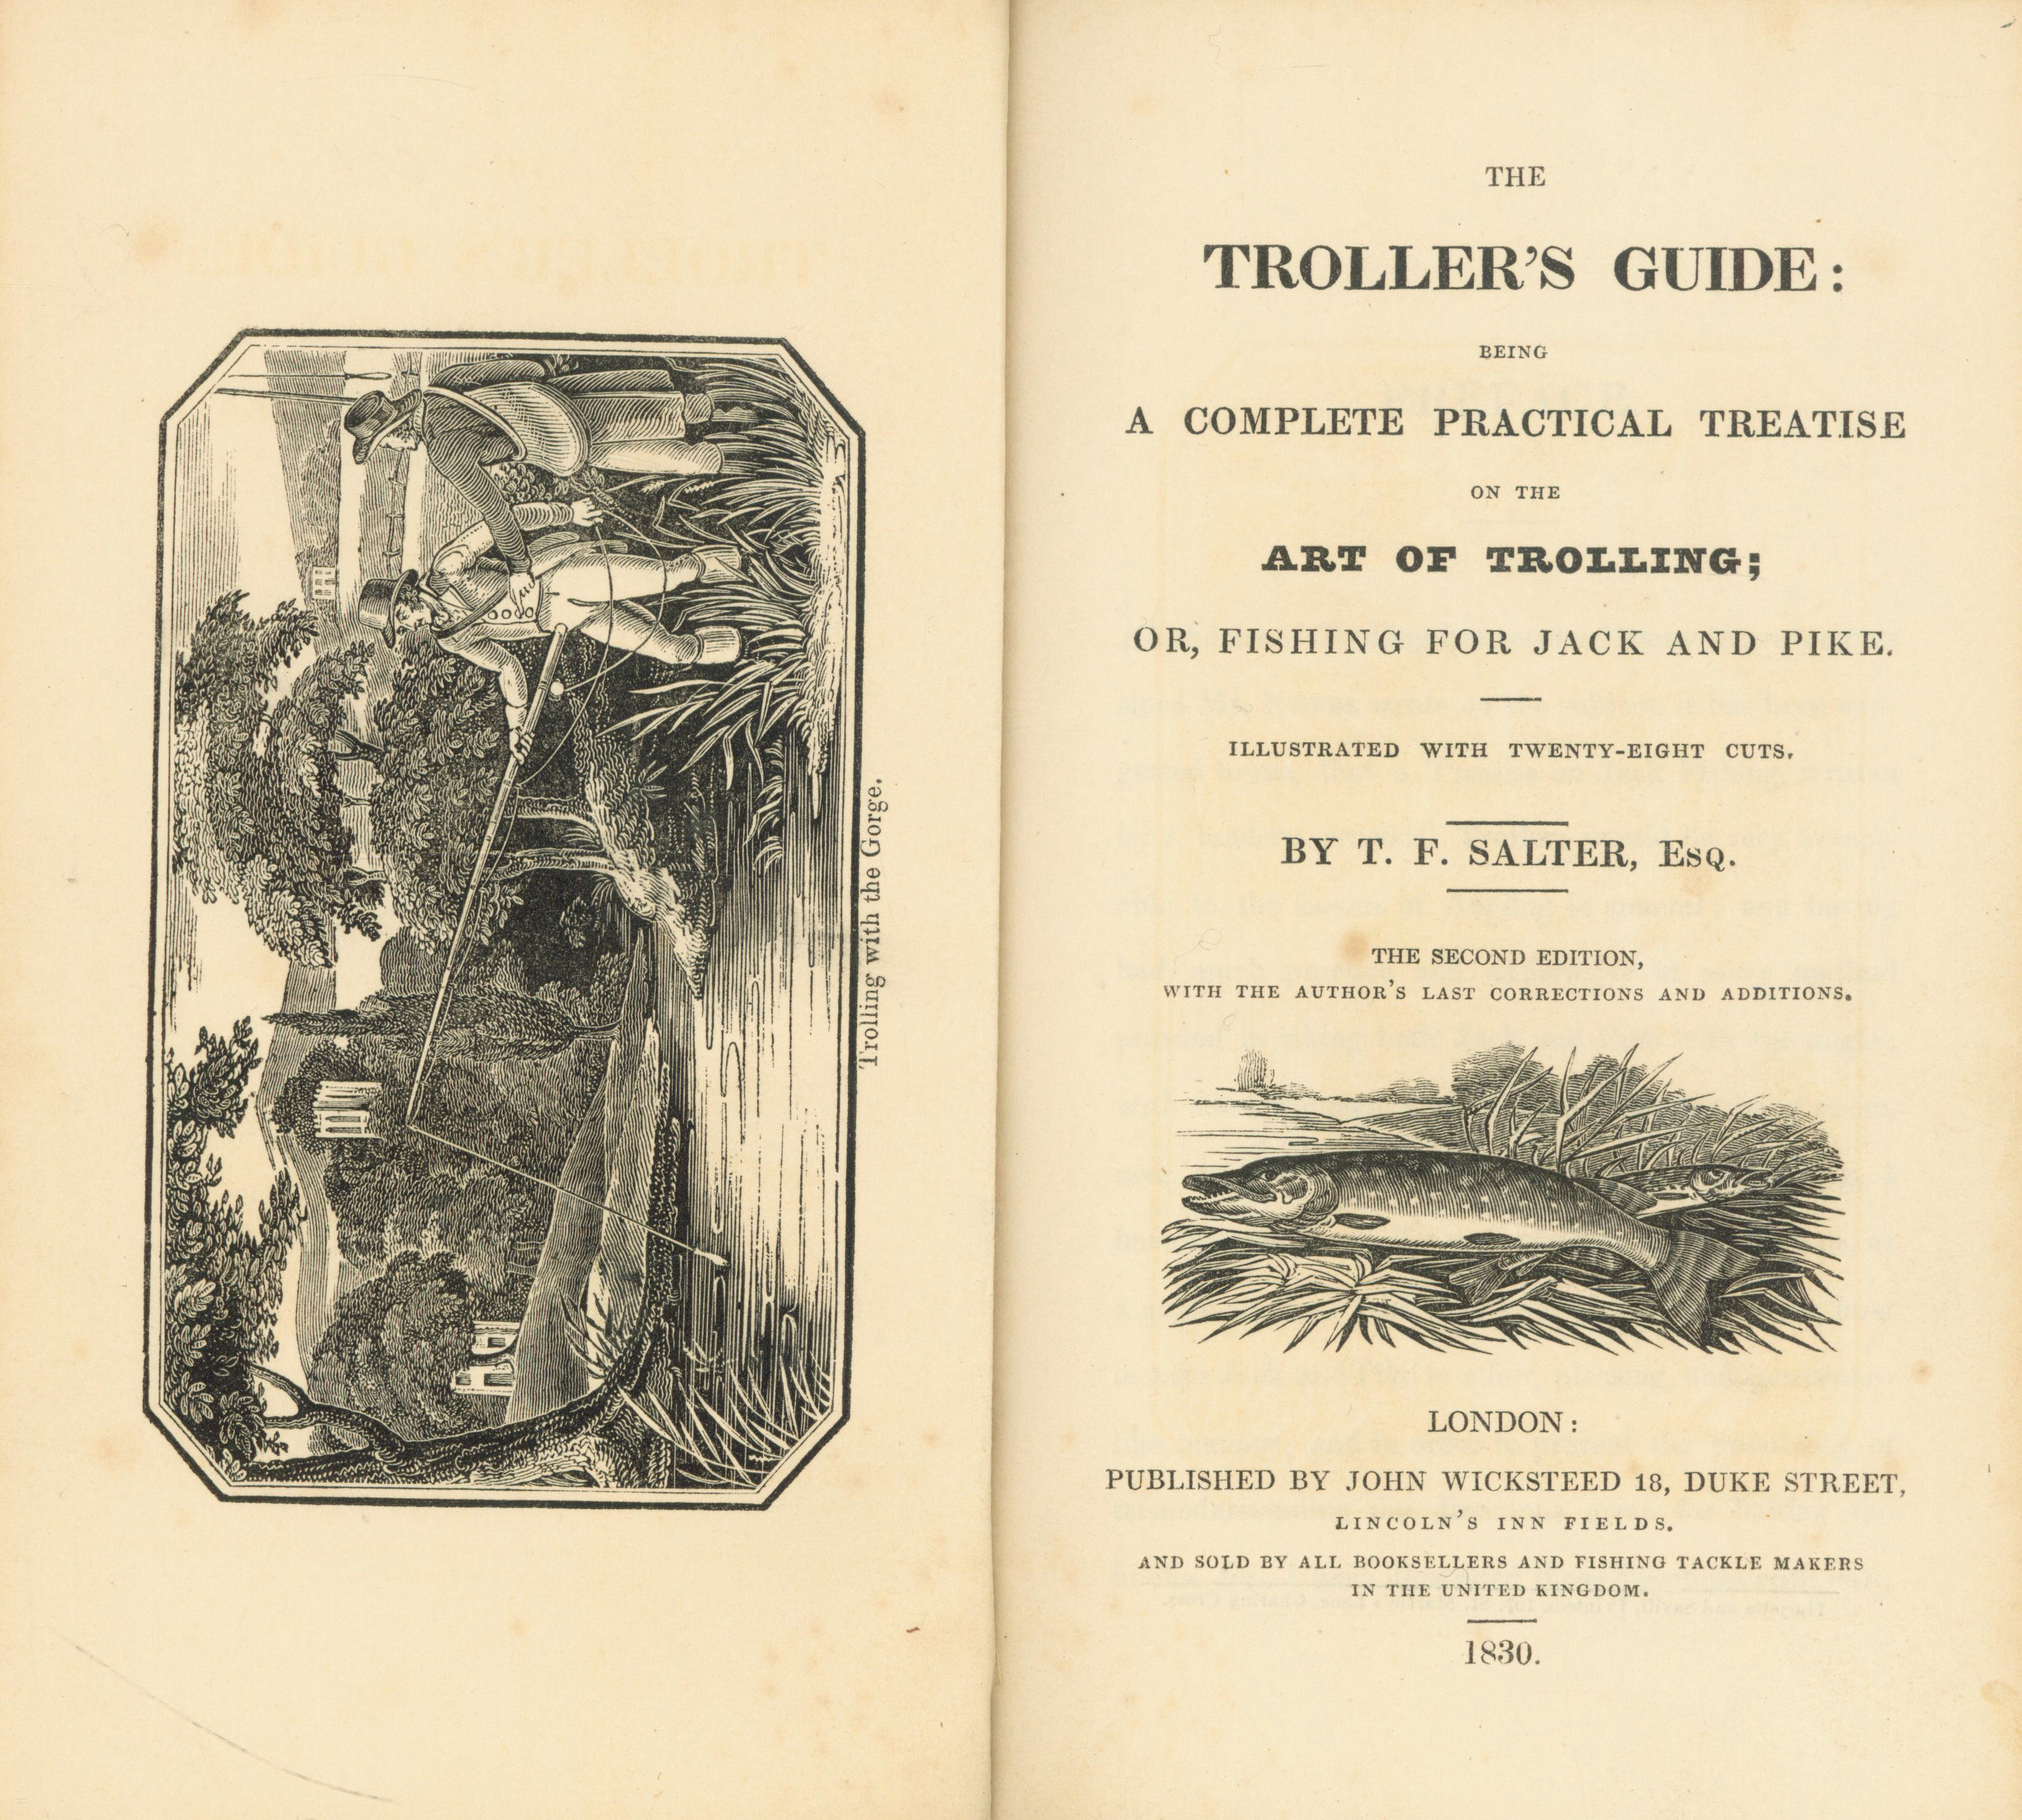 Bonhams : SALTER (THOMAS FREDERICK) The Troller's Guide, A FINE COPY, 1830; The  Angler's Guide, 1830; The Angler's Guide, Being a Complete Practical  Treatise on Angling, 1815; The Angler's Guide, 1841--FITZGIBBON (EDWARD)